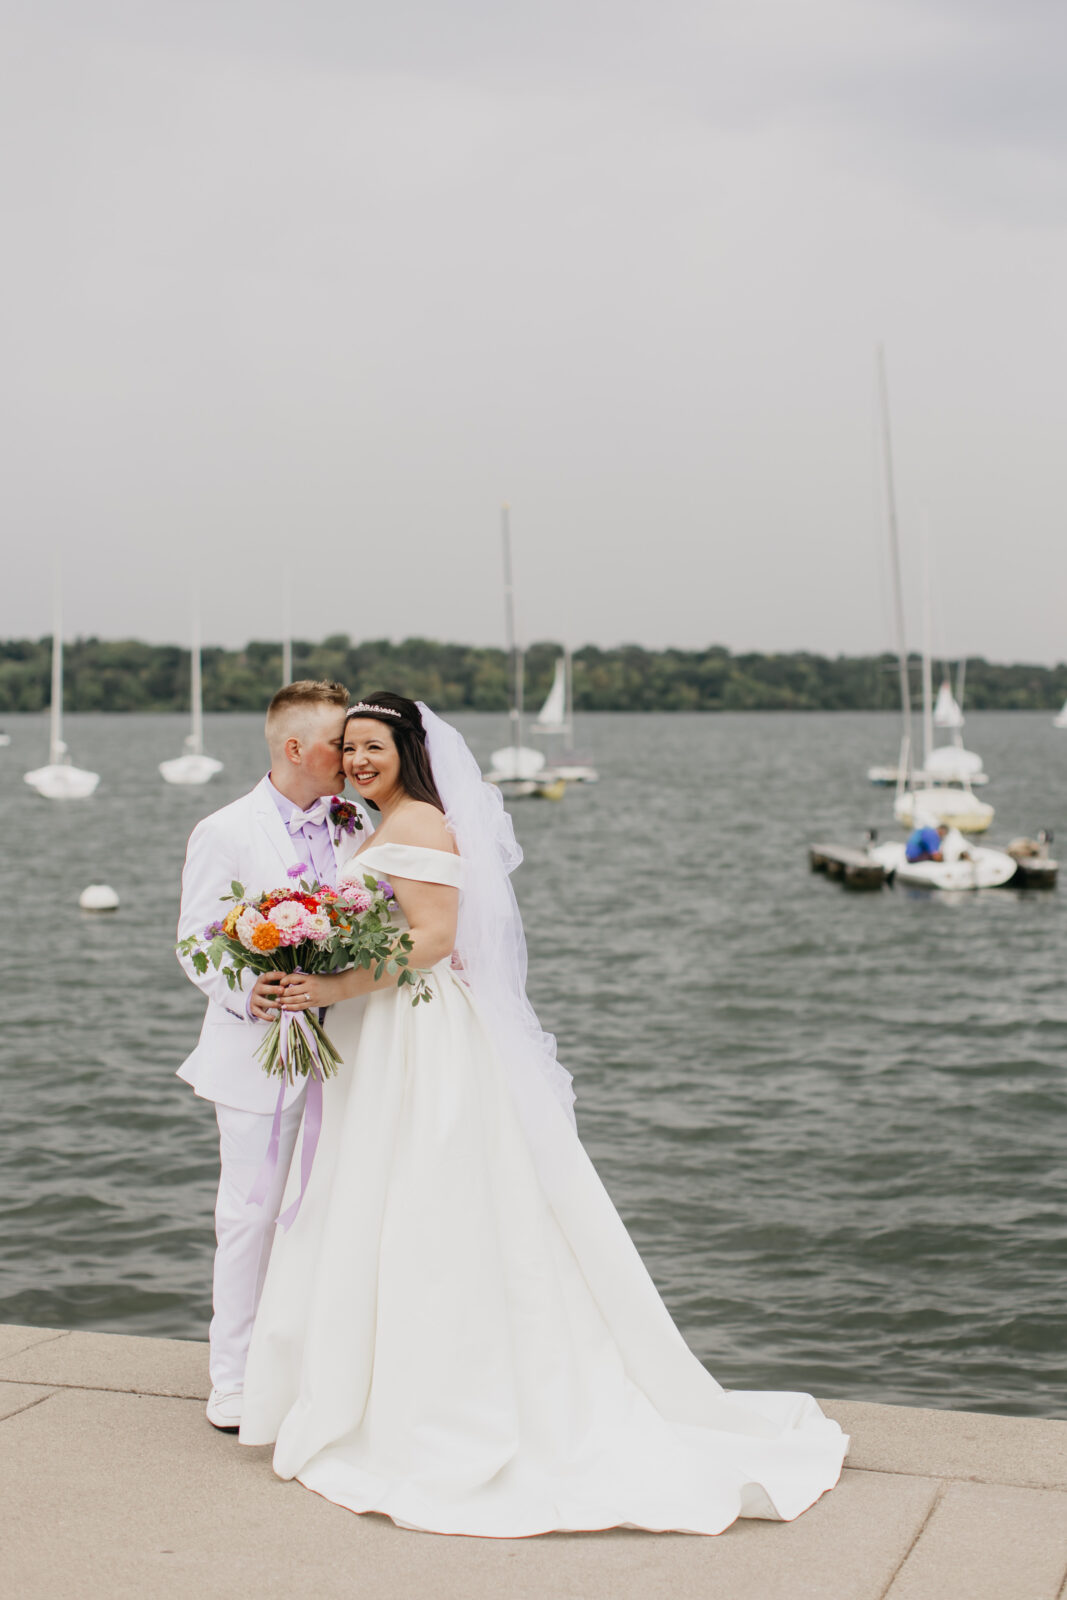 Photo of the bride and groom during their first looks at Lake Harriet